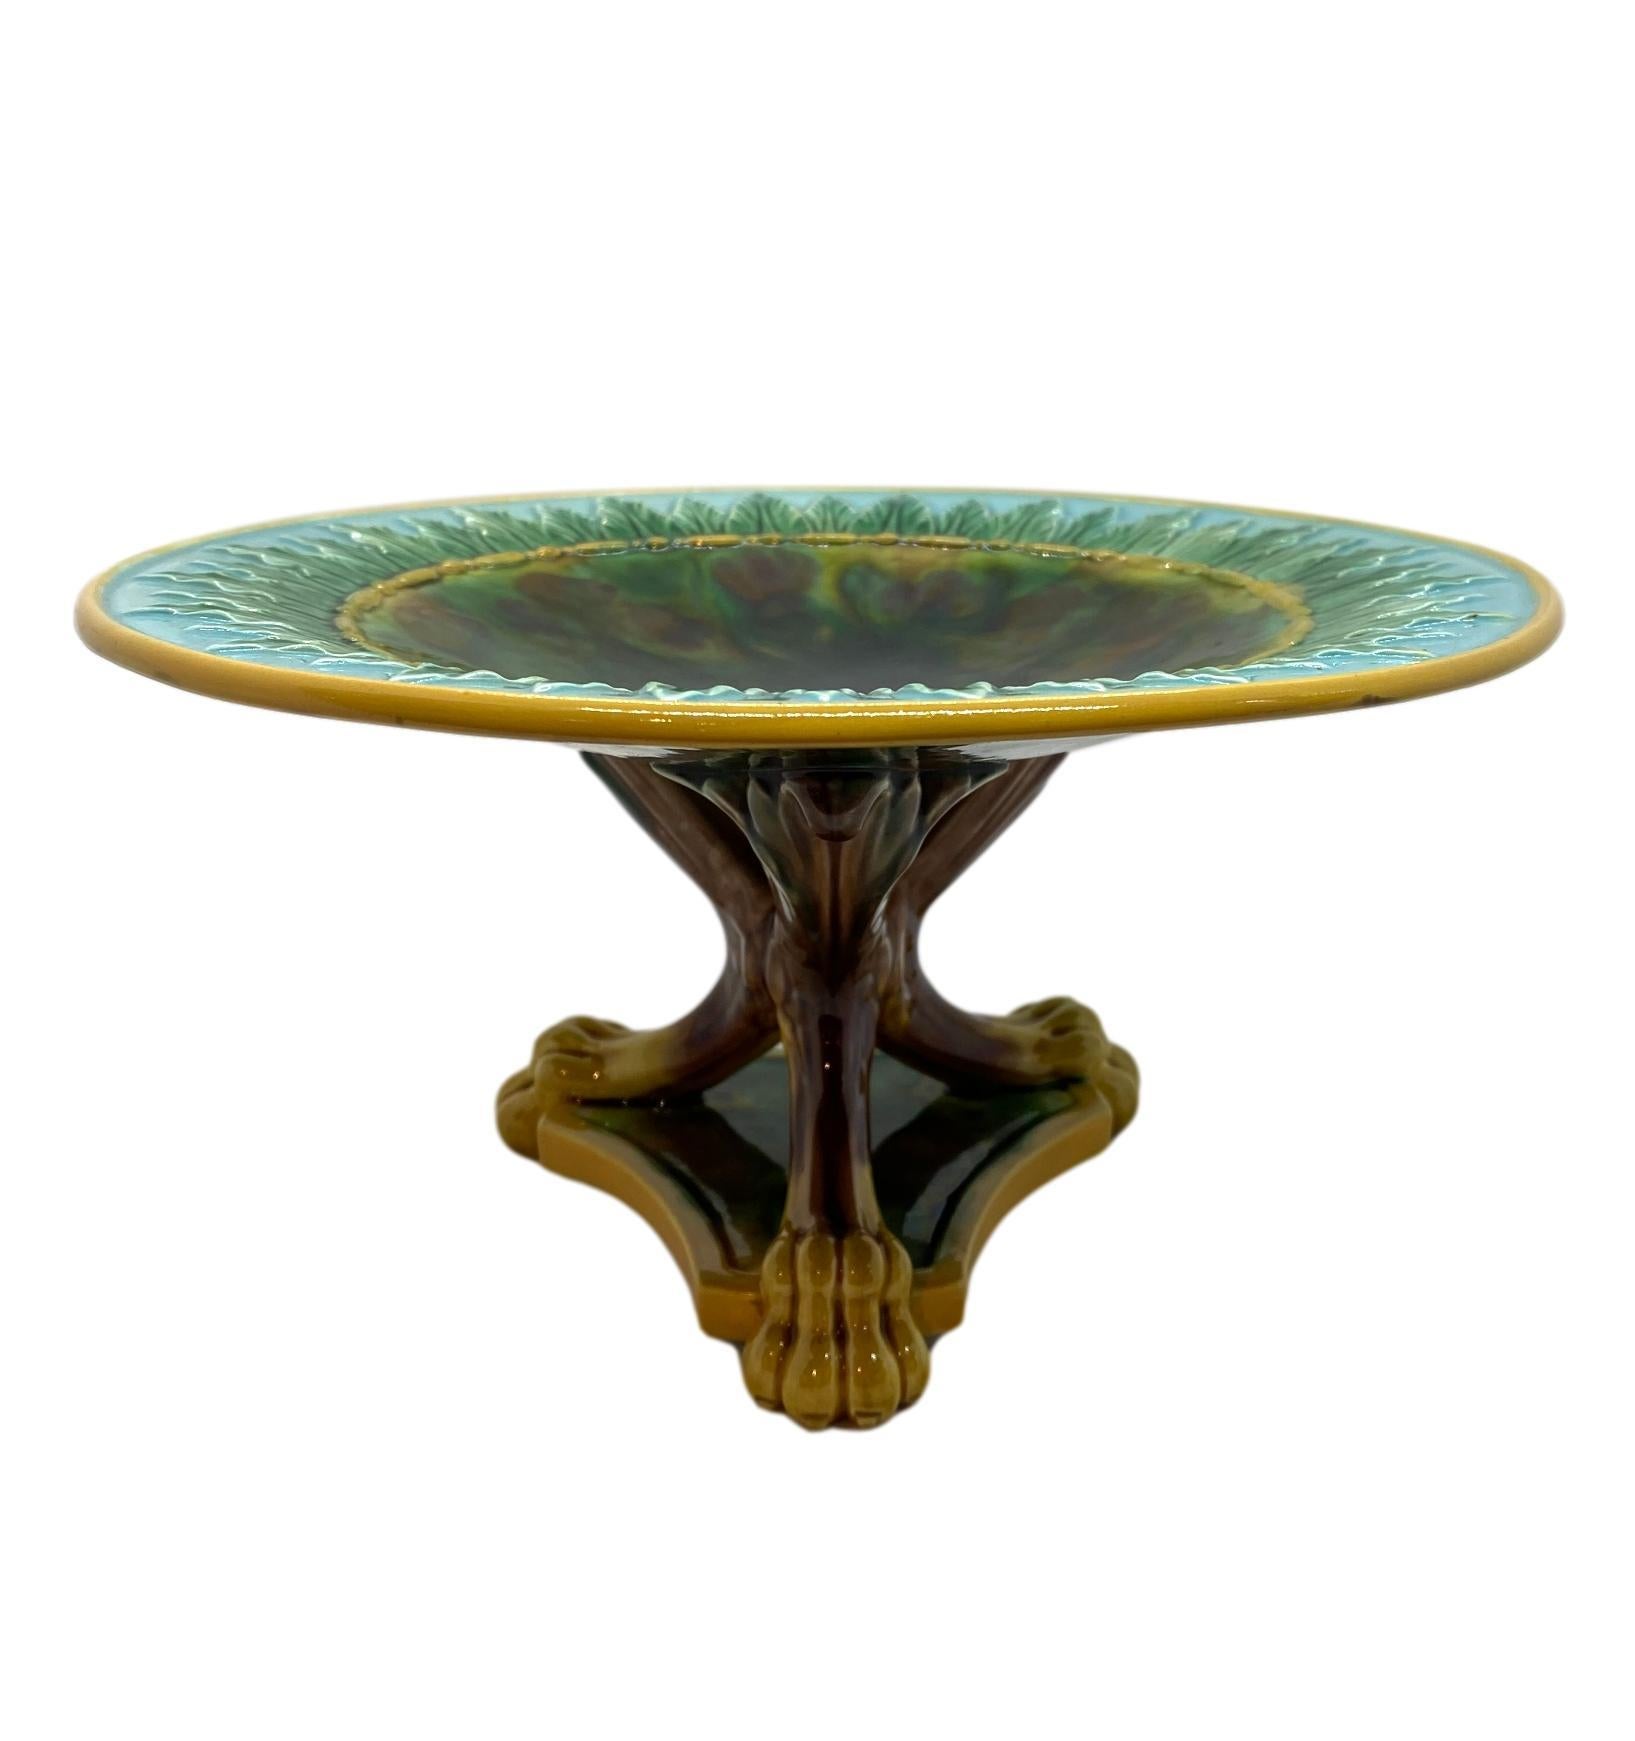 Victorian George Jones Majolica Compote, Mottled Center, Green Leaves on Turquoise, 1870